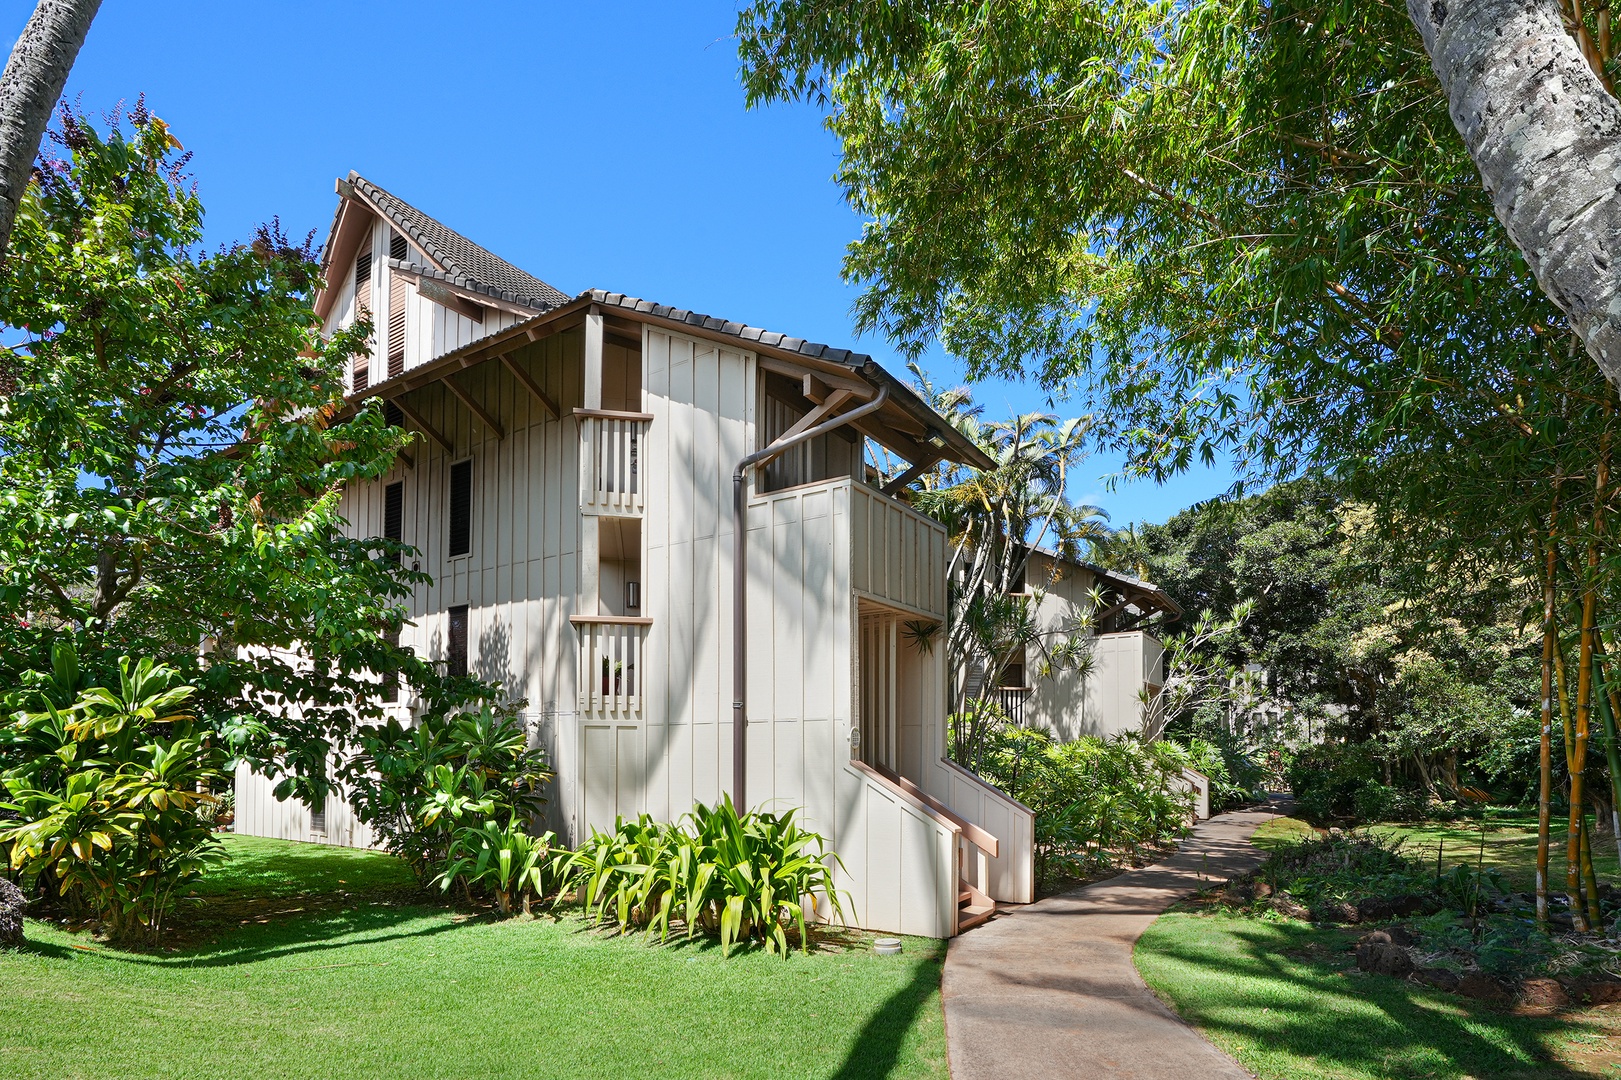 Koloa Vacation Rentals, Waikomo Streams 203 - A captivating exterior shot showcasing the beauty and charm of your home away from home.